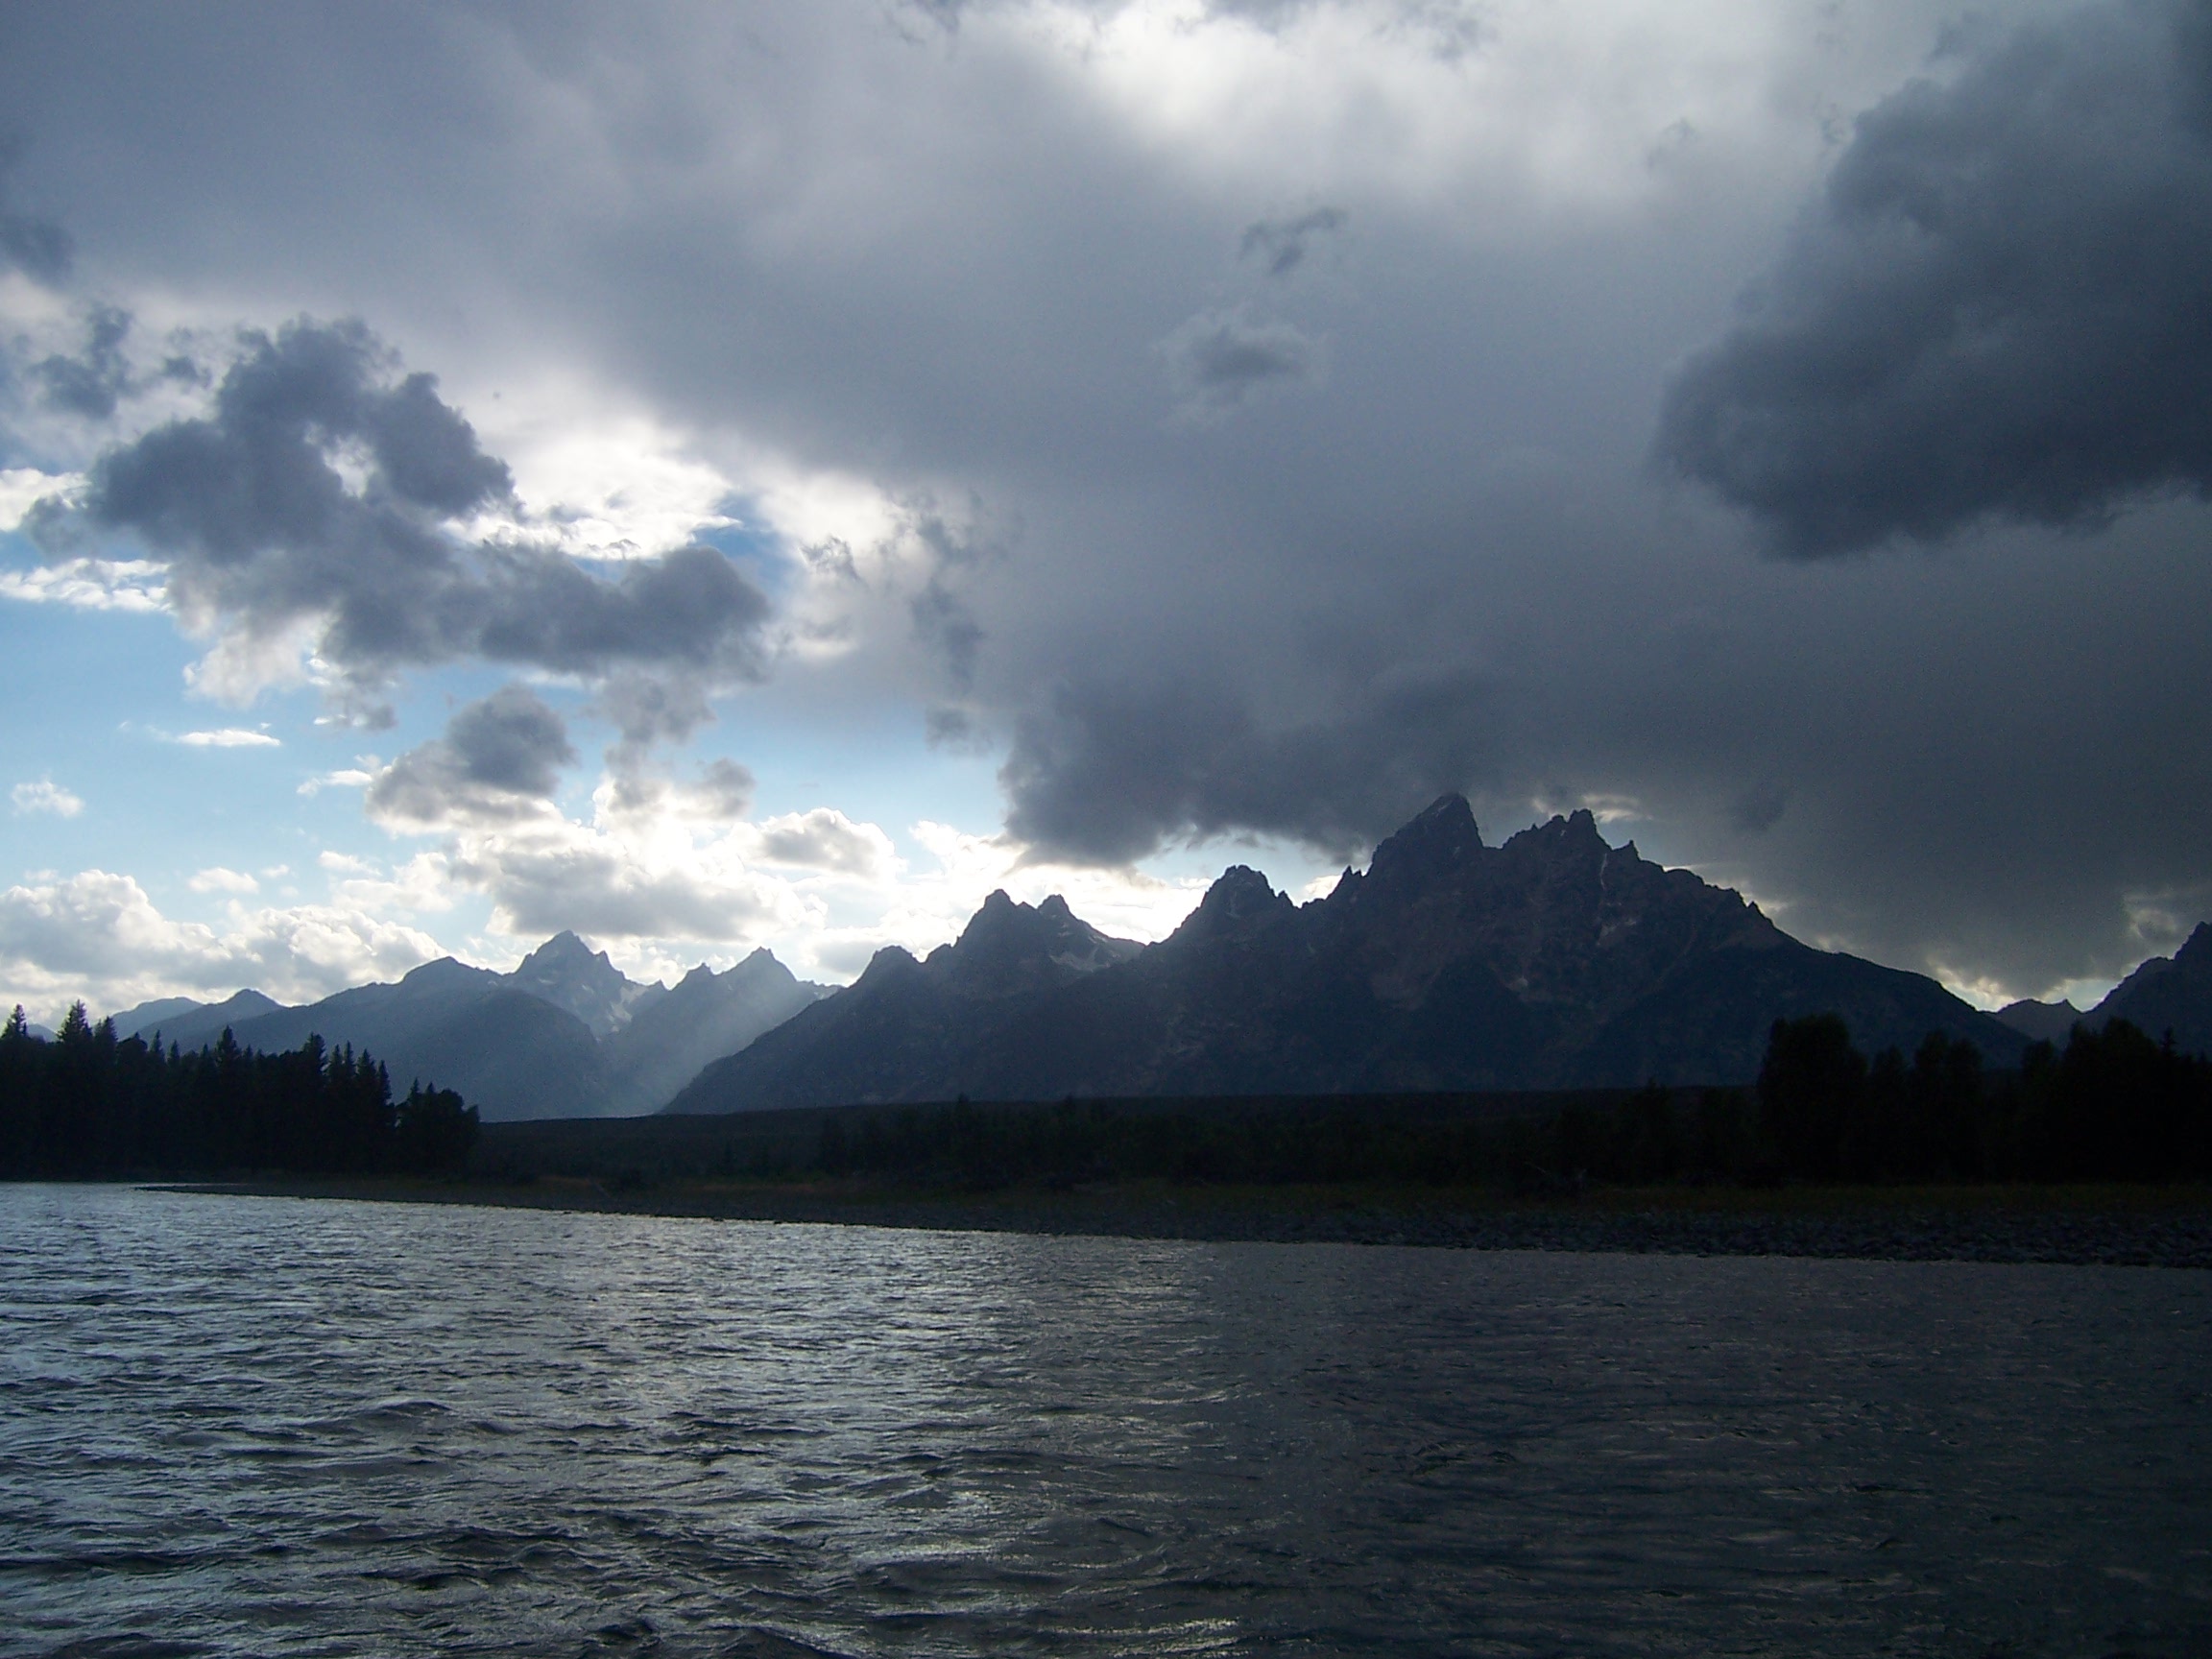 Grand Teton Range from Snake River. Bad weather is starting to brew.